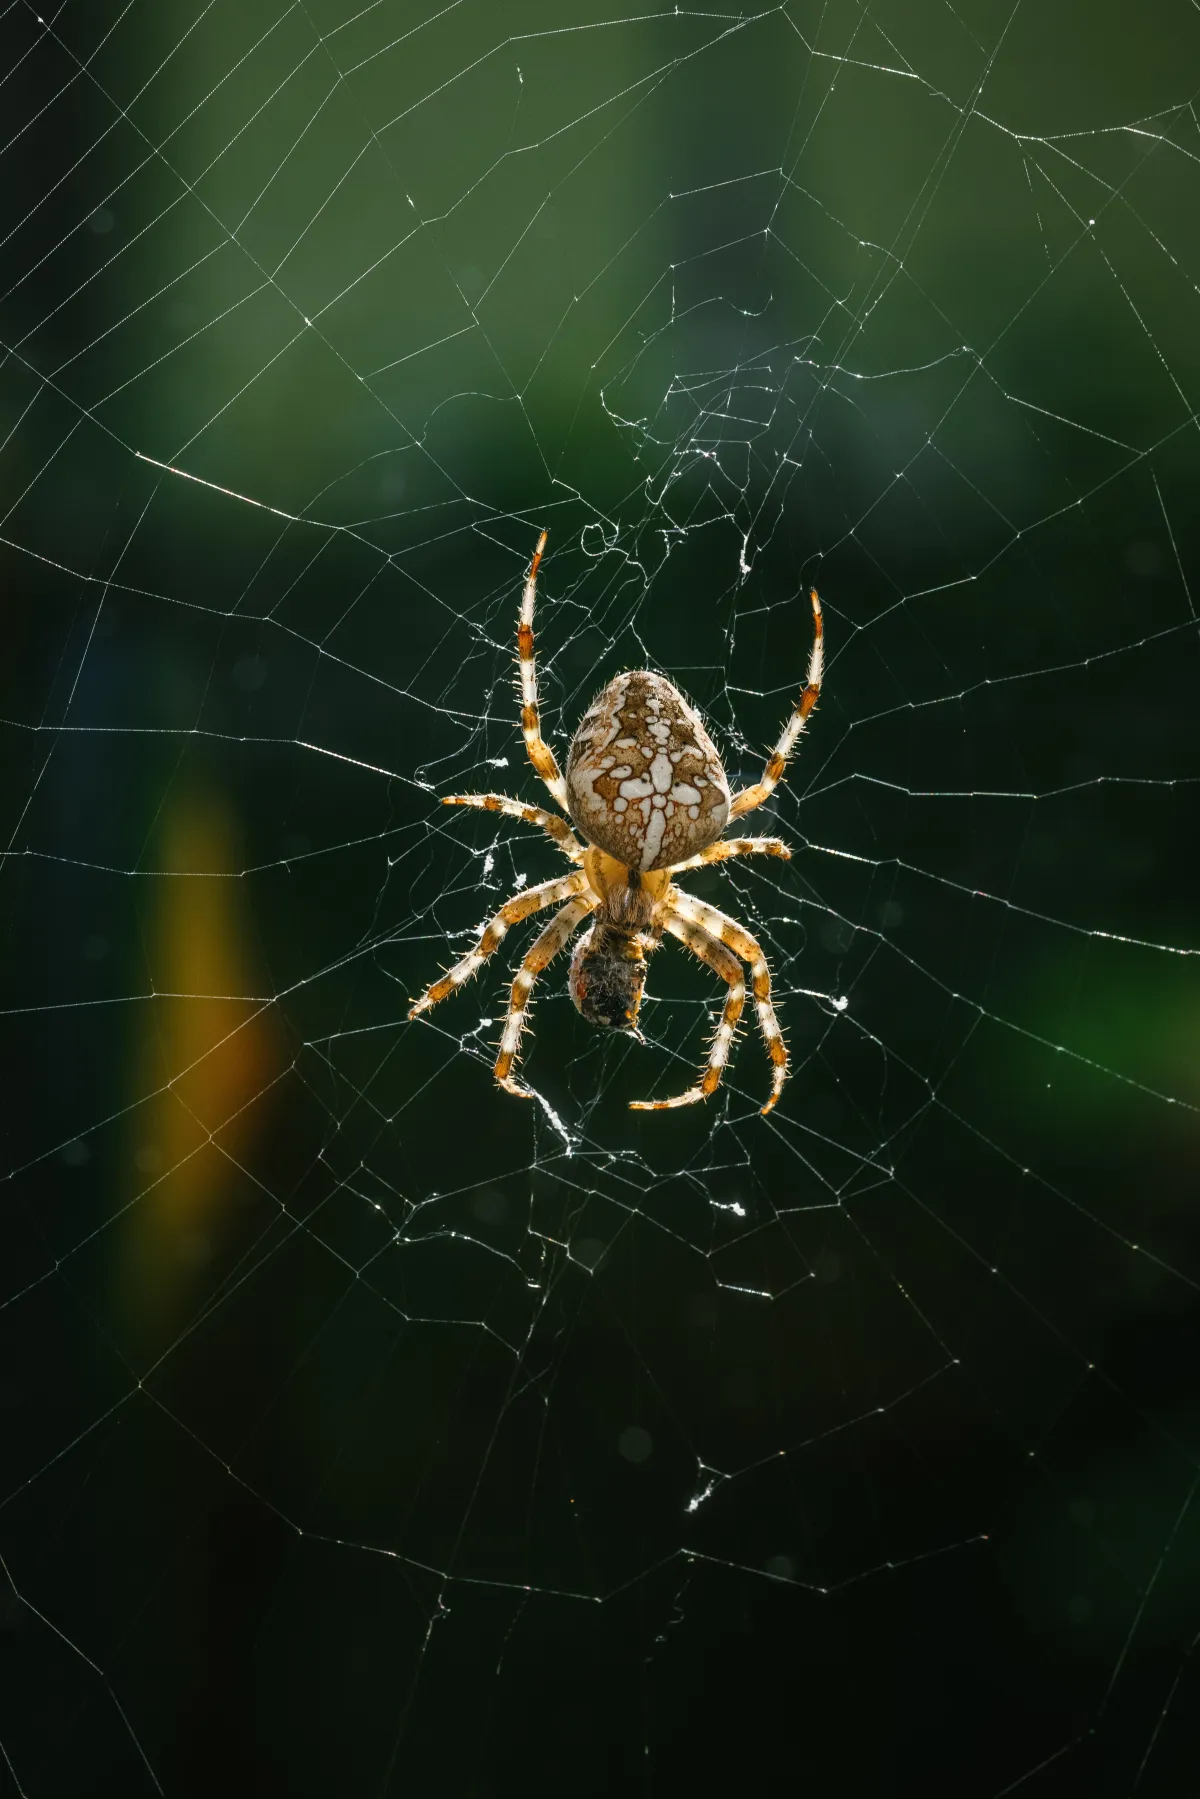 a close up photograph of a spider crawling on a web